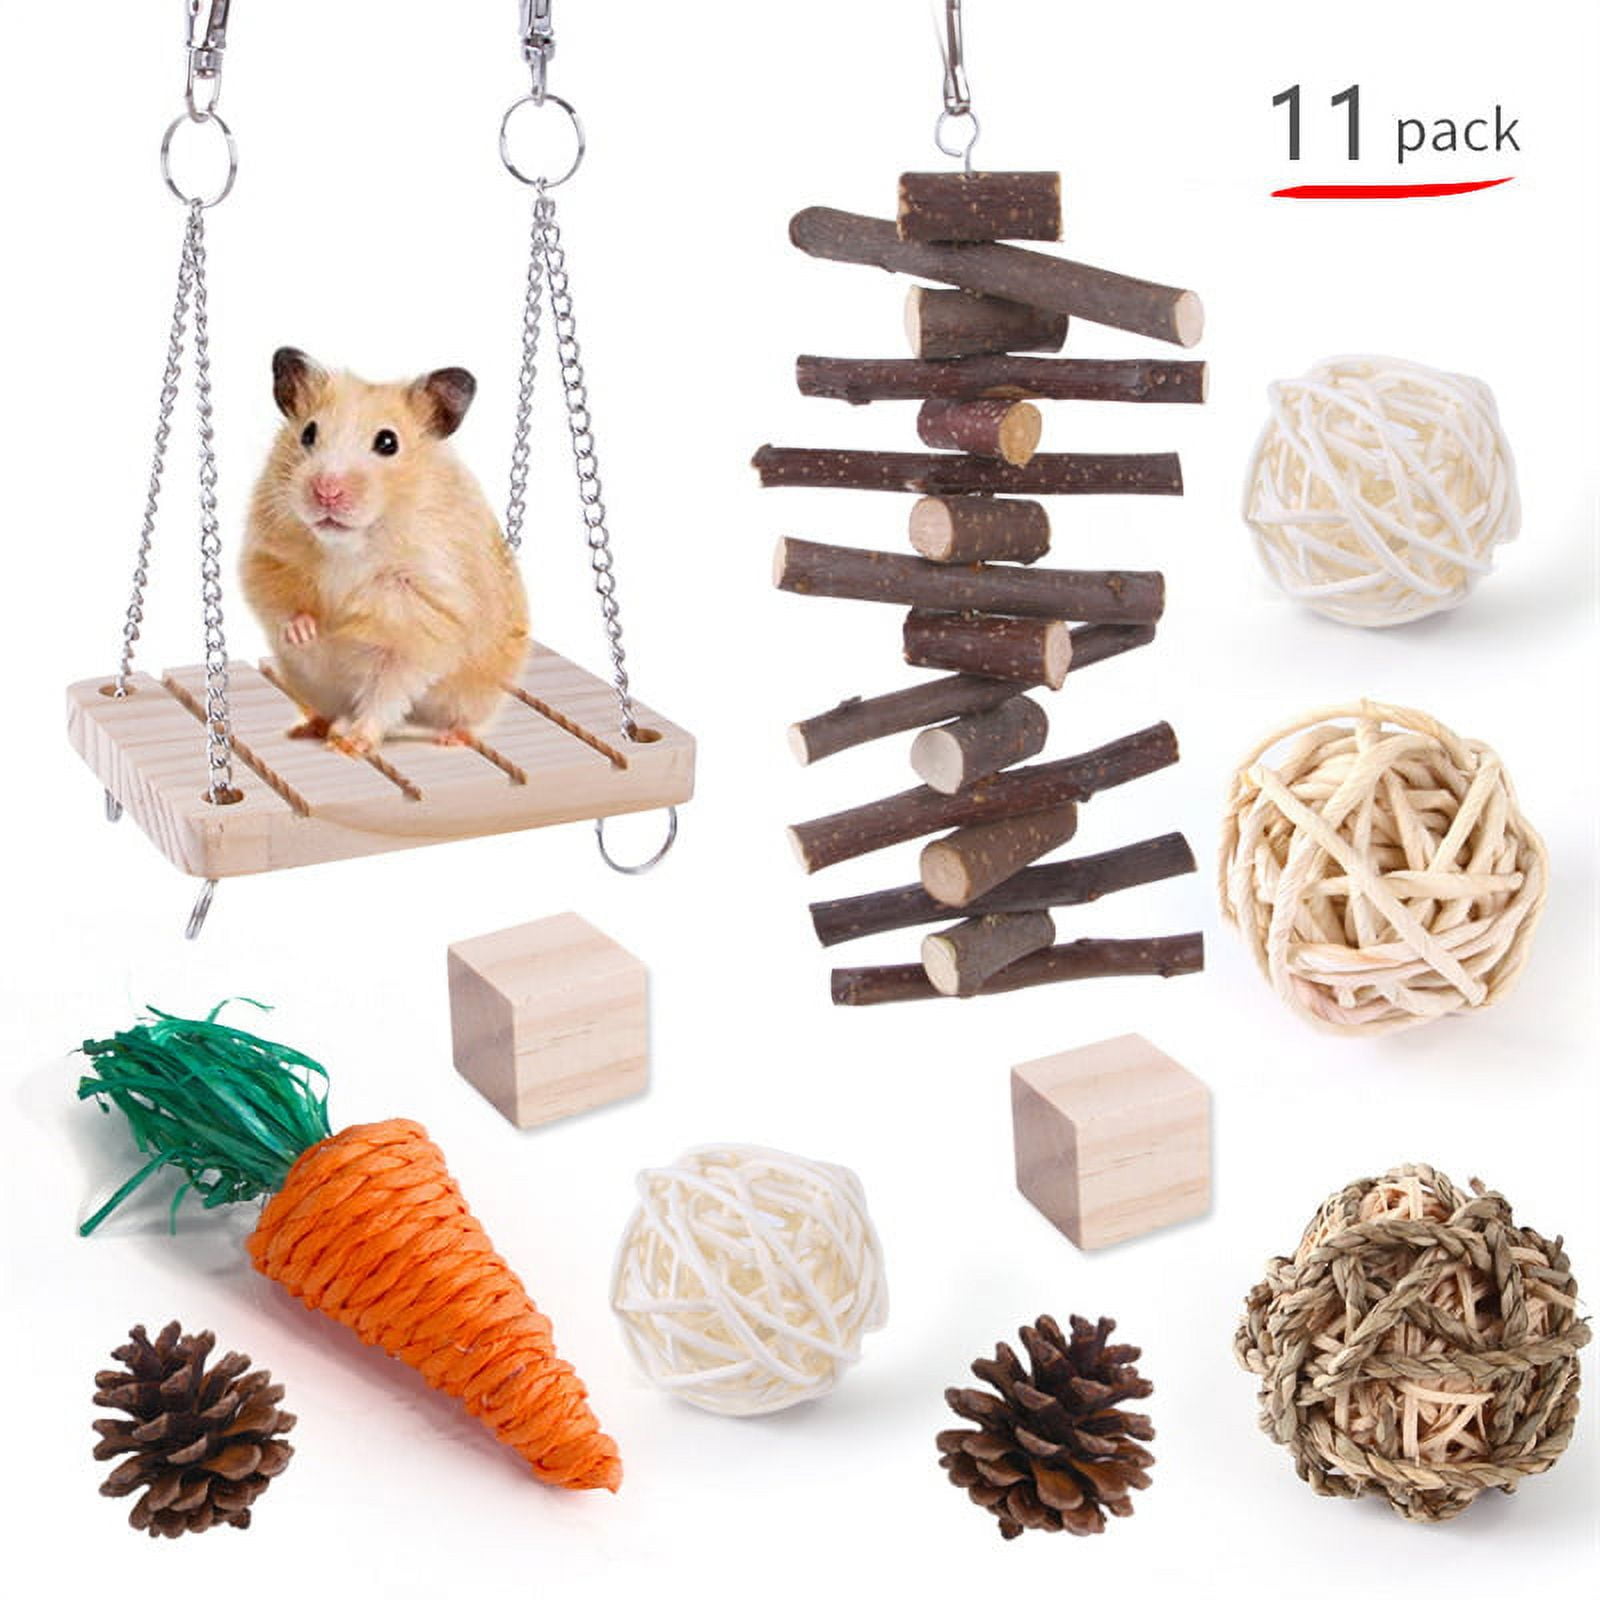 Hamster Chew Toy 10pcs Natural Wood